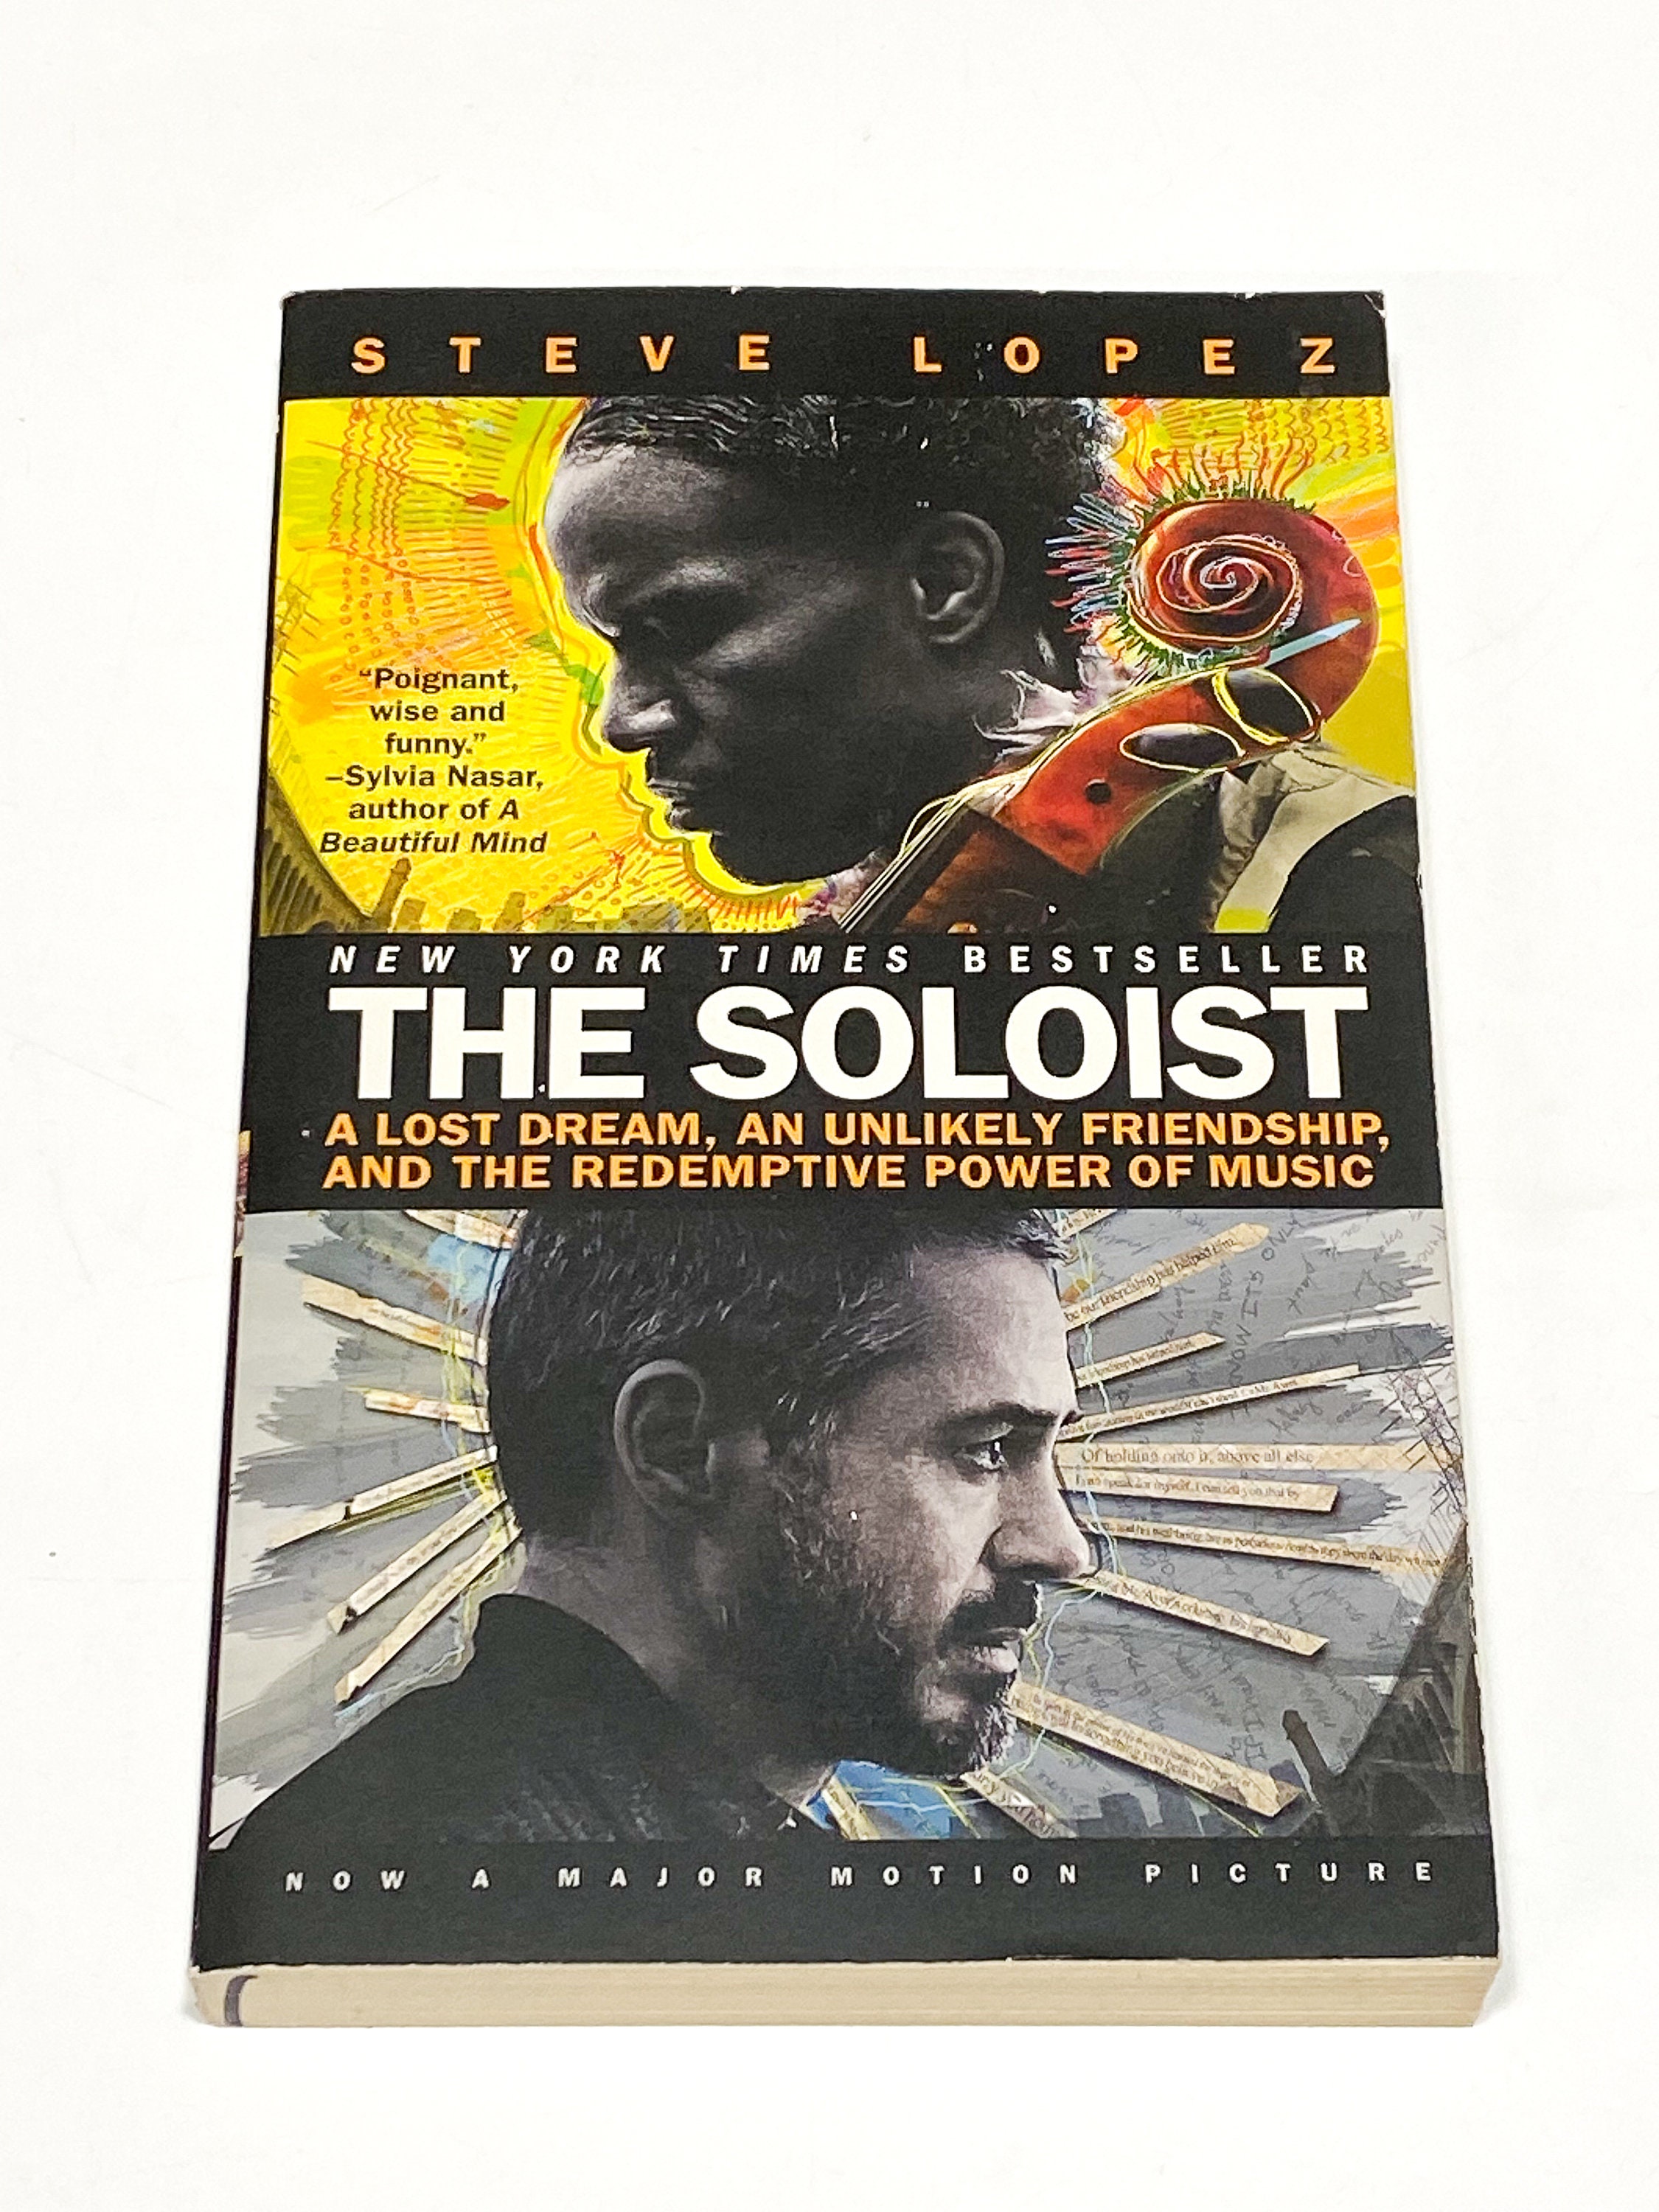 The Soloist: A Lost Dream, an Unlikely Friendship, and the